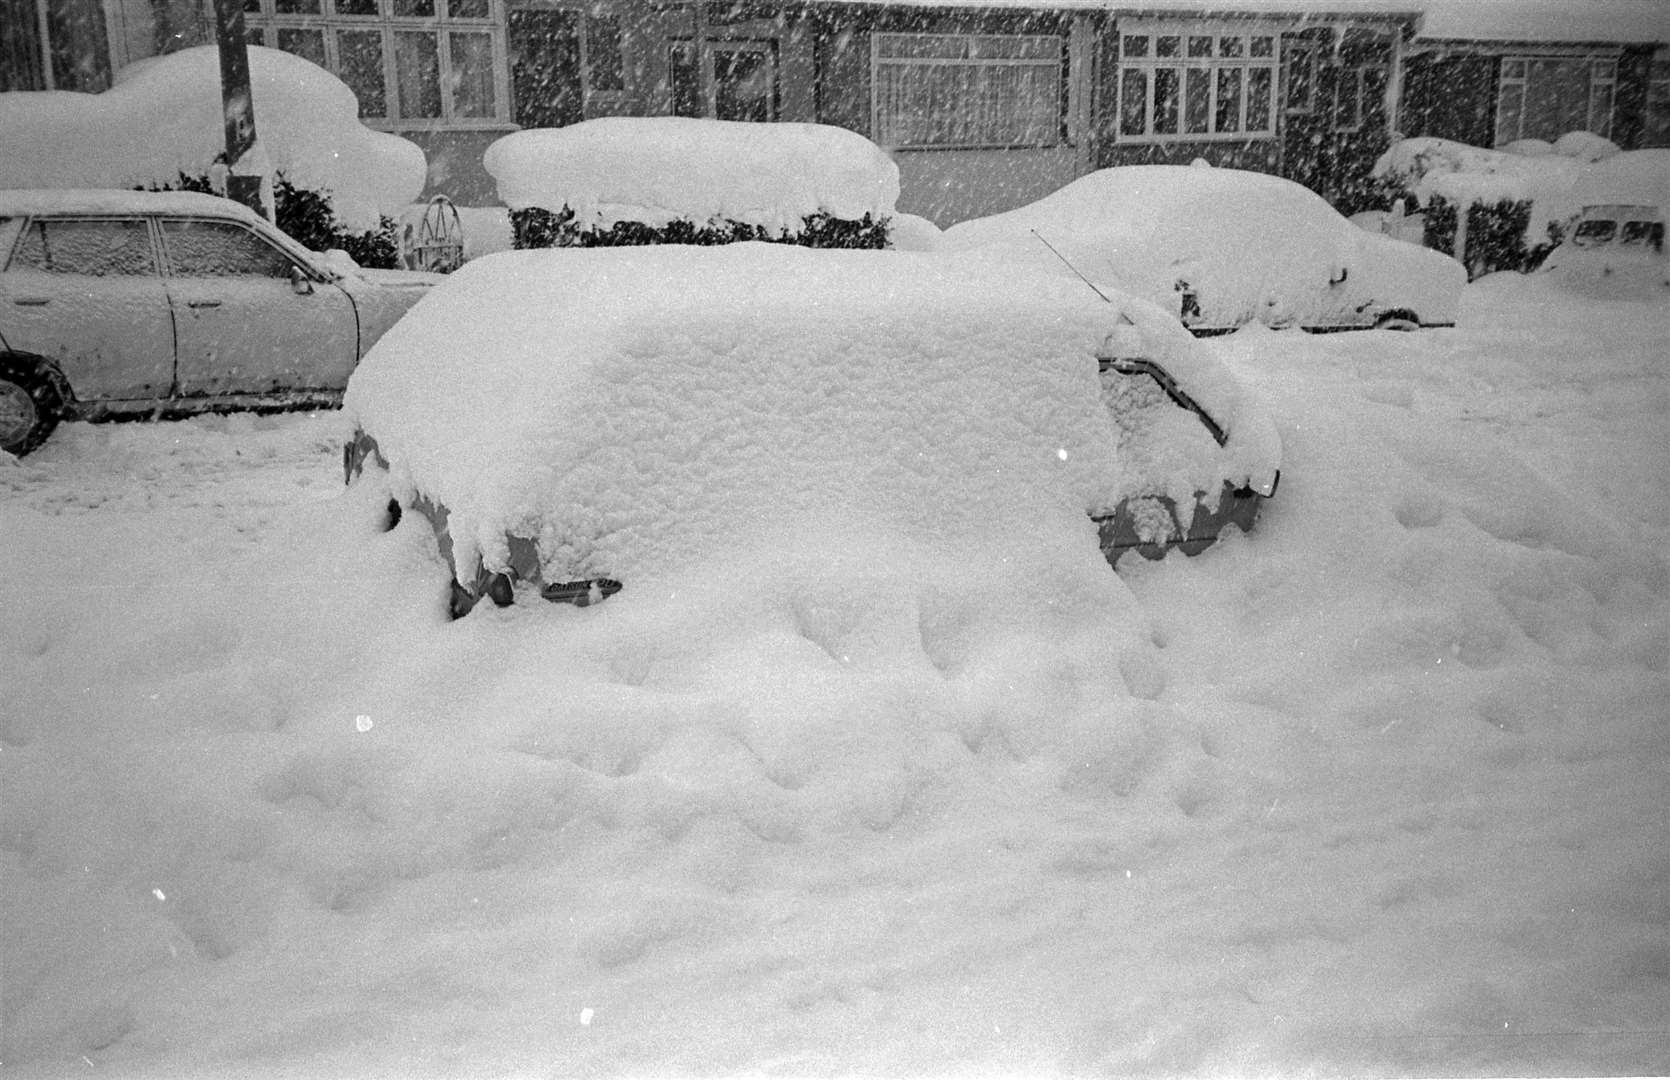 There's a car under there somewhere